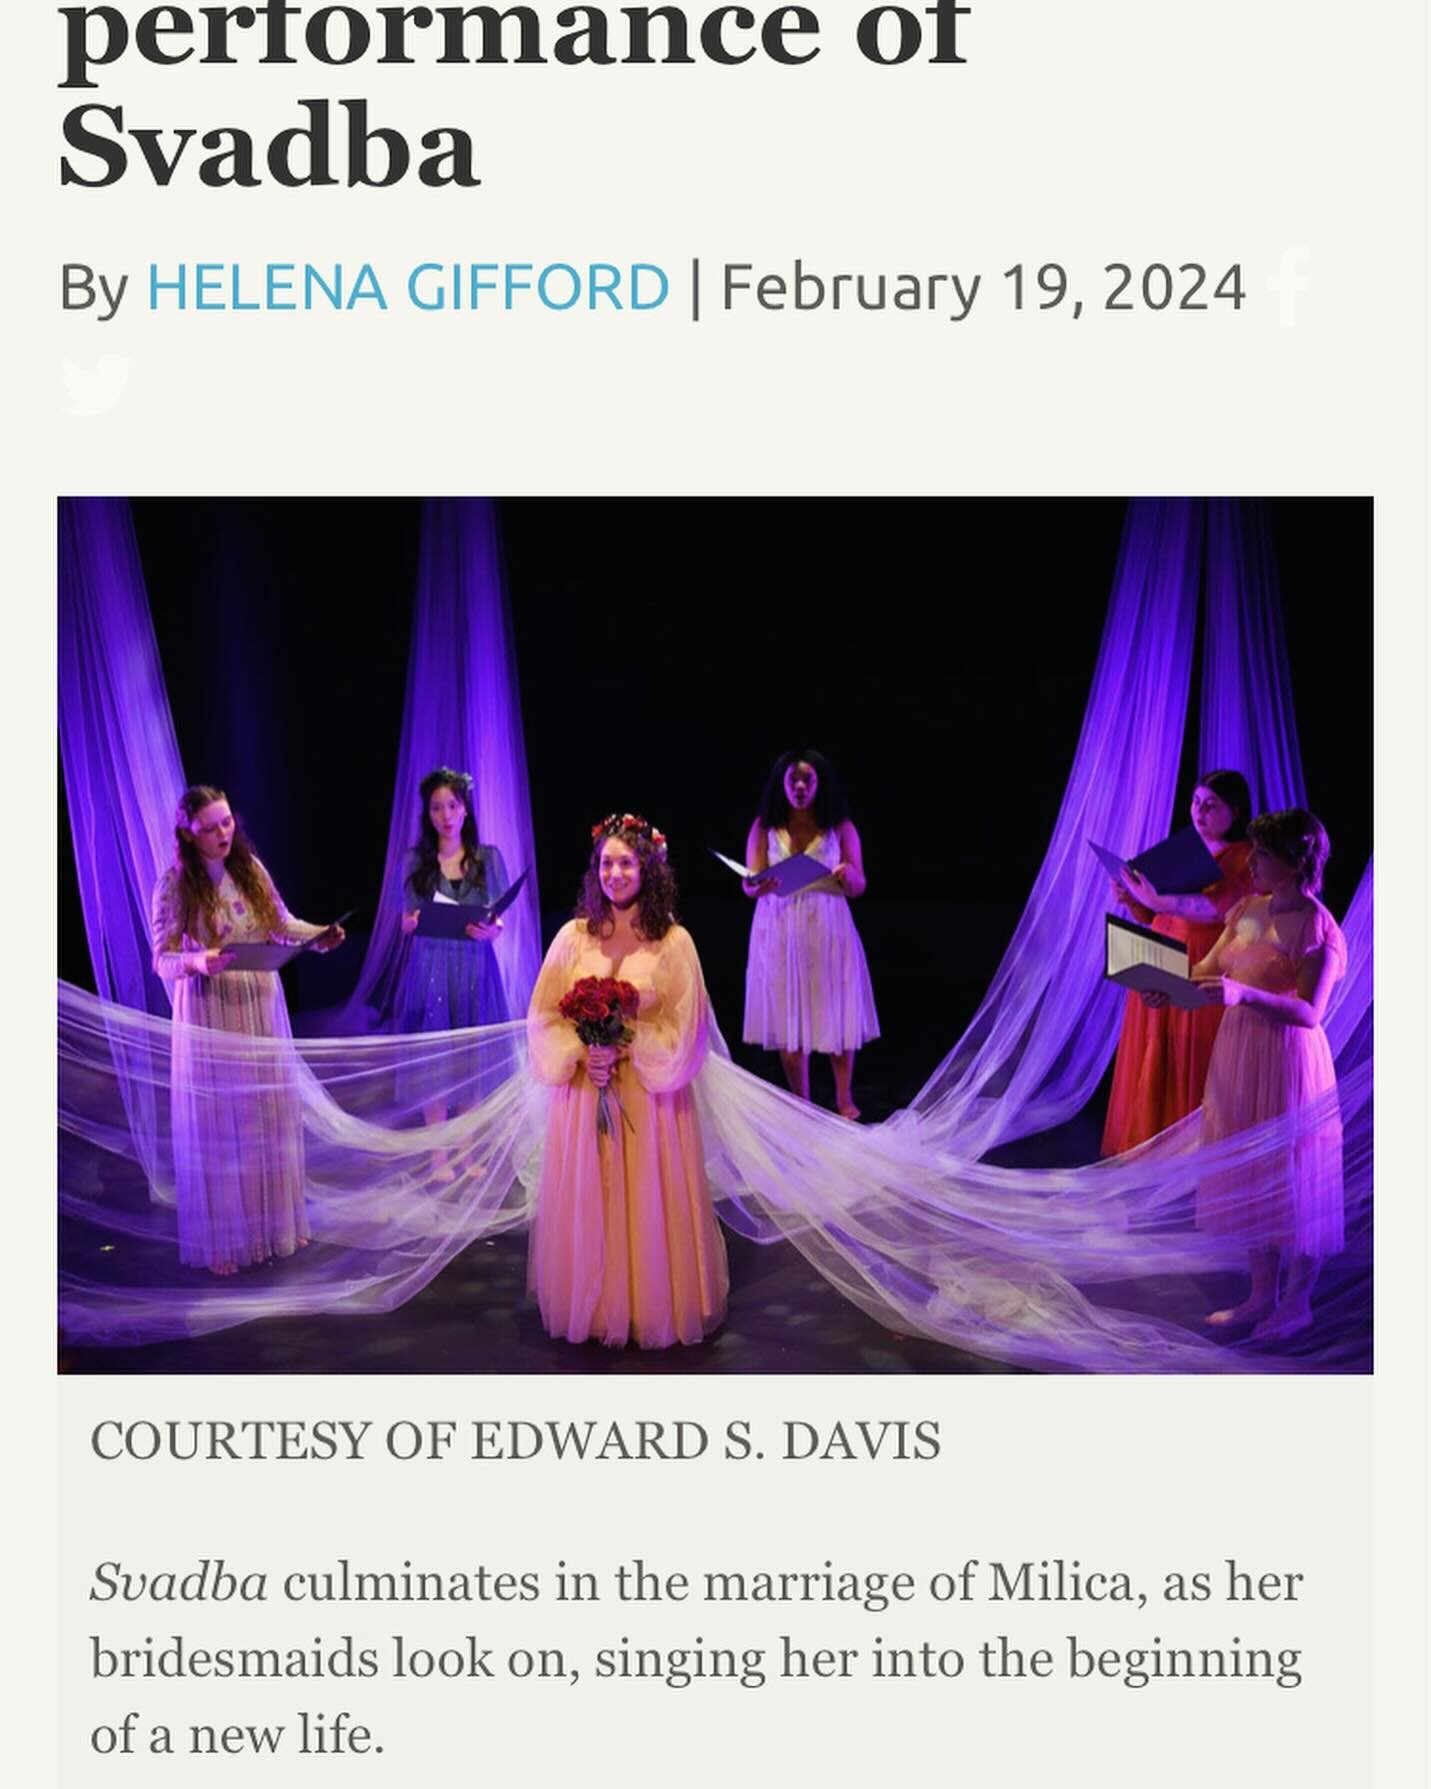 Really lovely write up about our Svadba @baltimoretheatreproject last weekend- 🔗 below to full article !

https://www.jhunewsletter.com/article/2024/02/a-surreal-portrayal-of-marriage-in-peabody-chamber-operas-performance-of-svadba

#opera #modern #